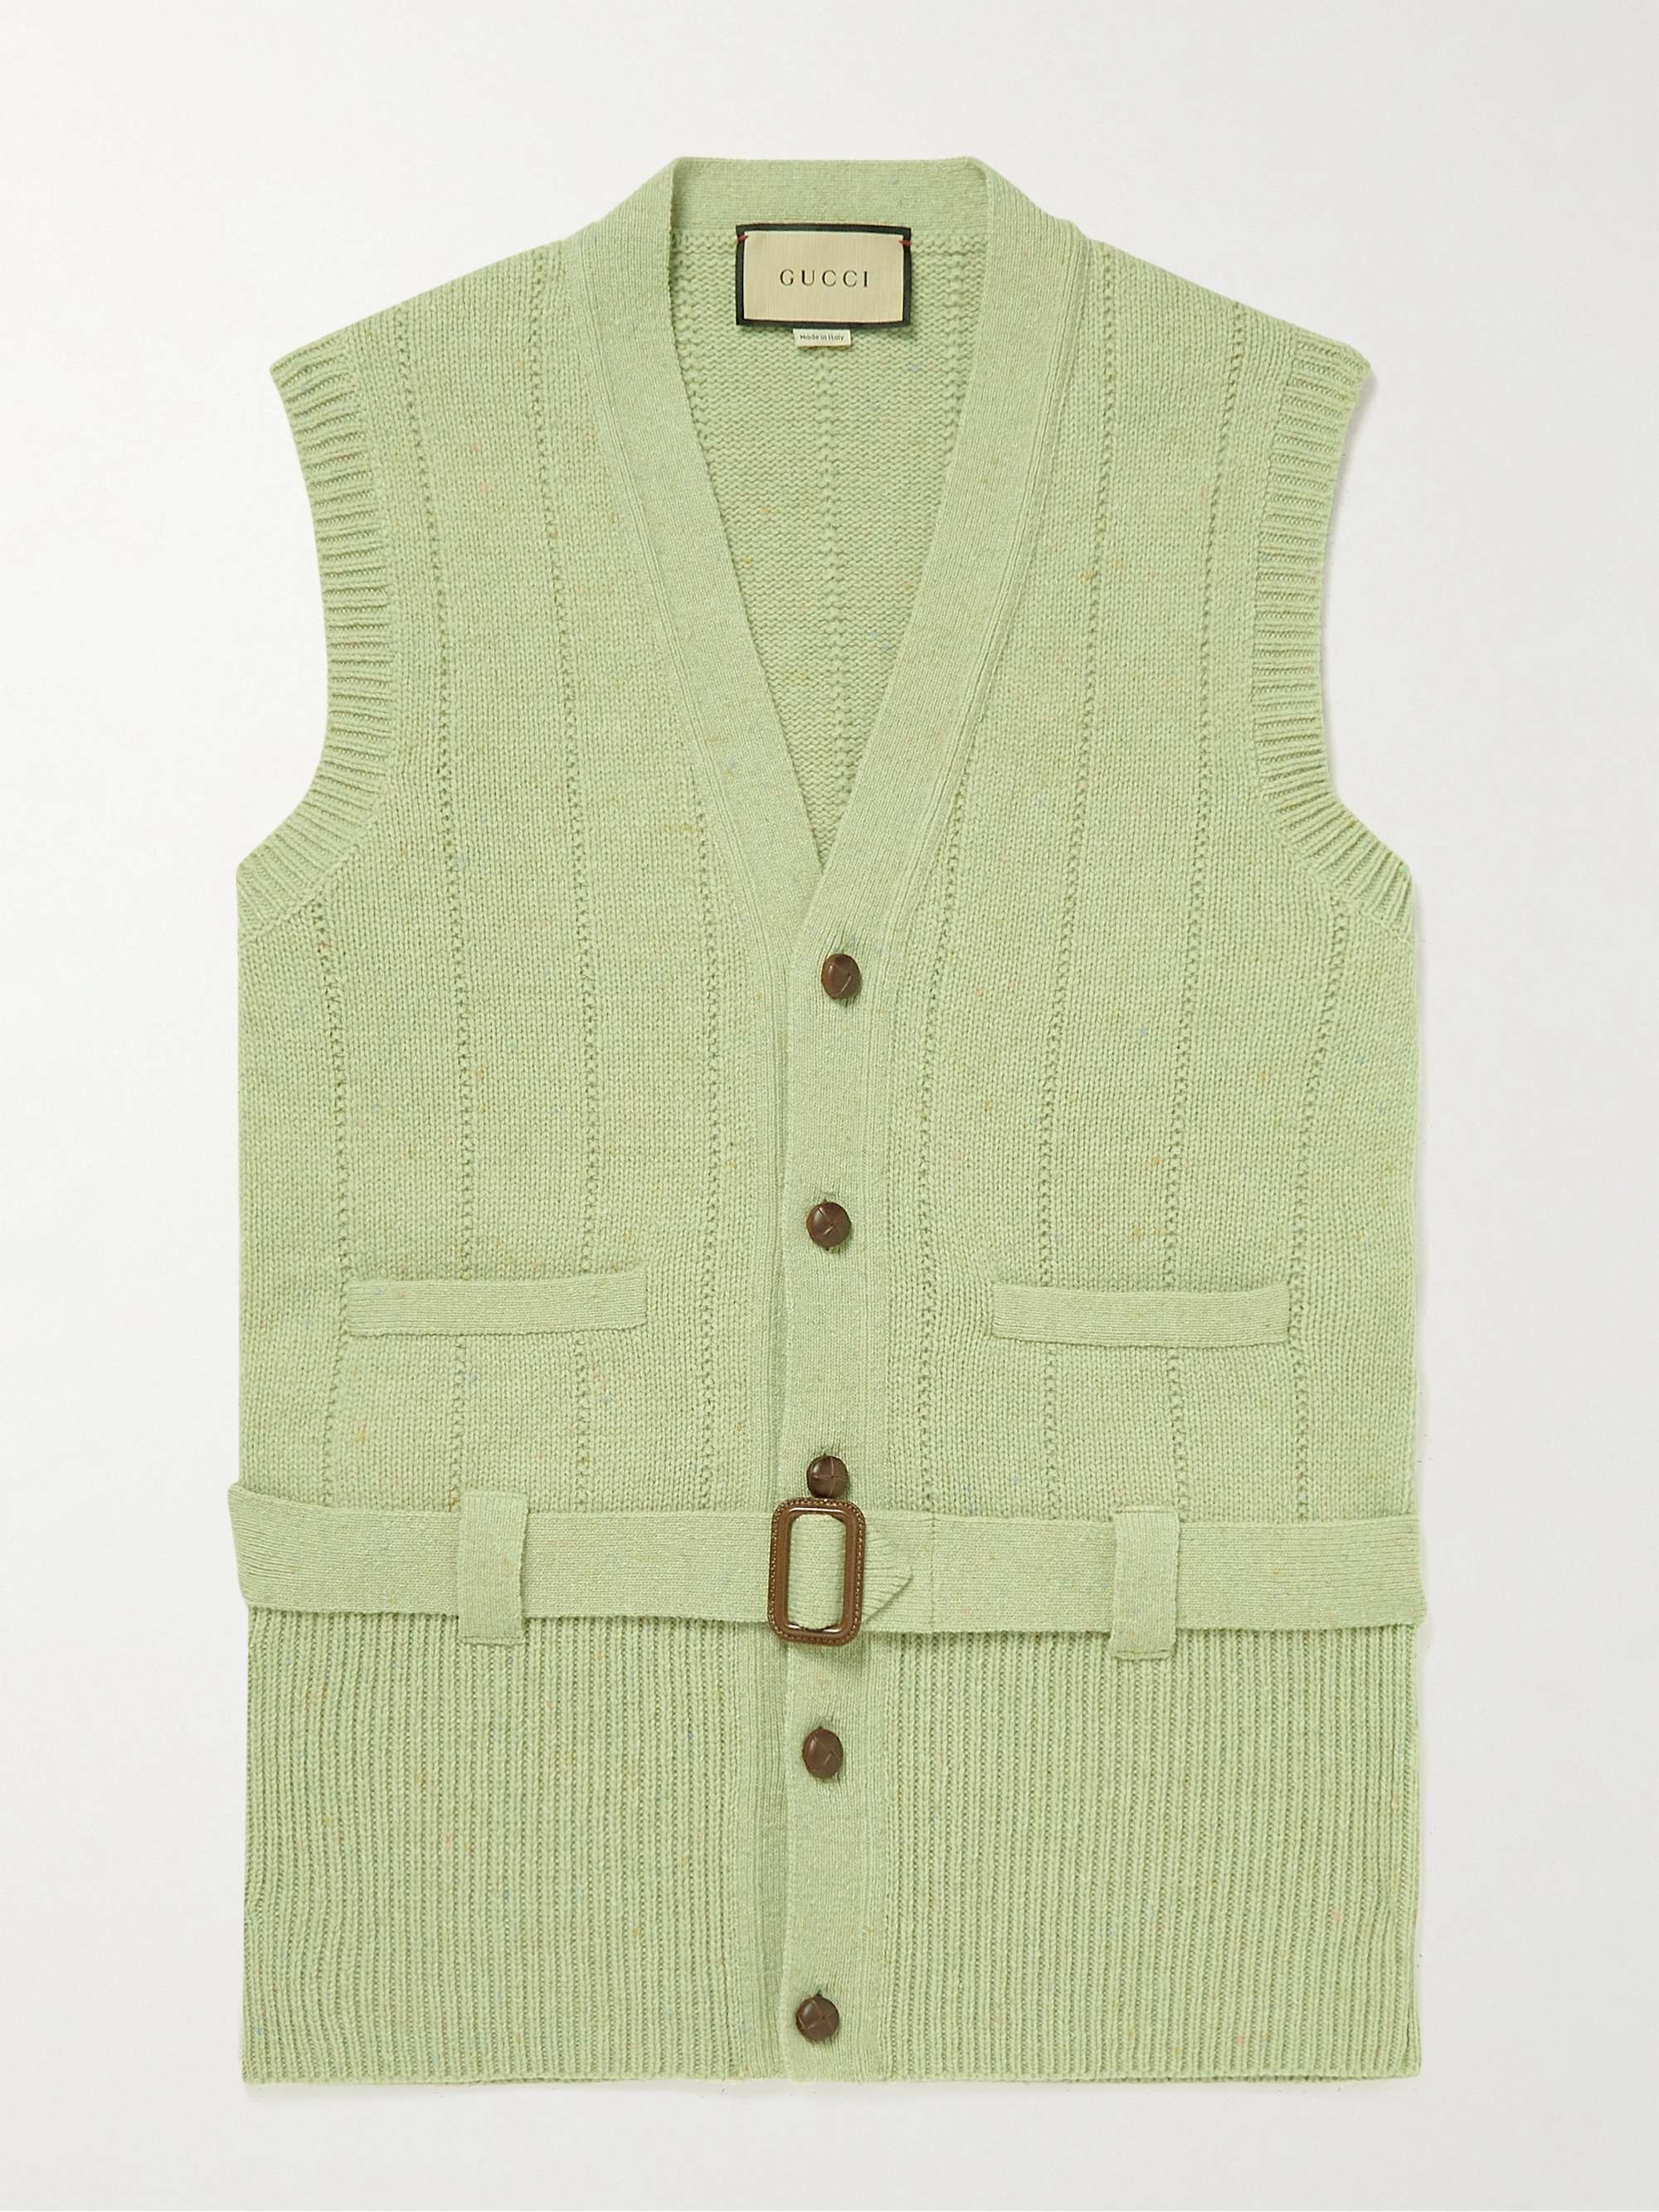 GUCCI Belted Ribbed Wool Sweater Vest